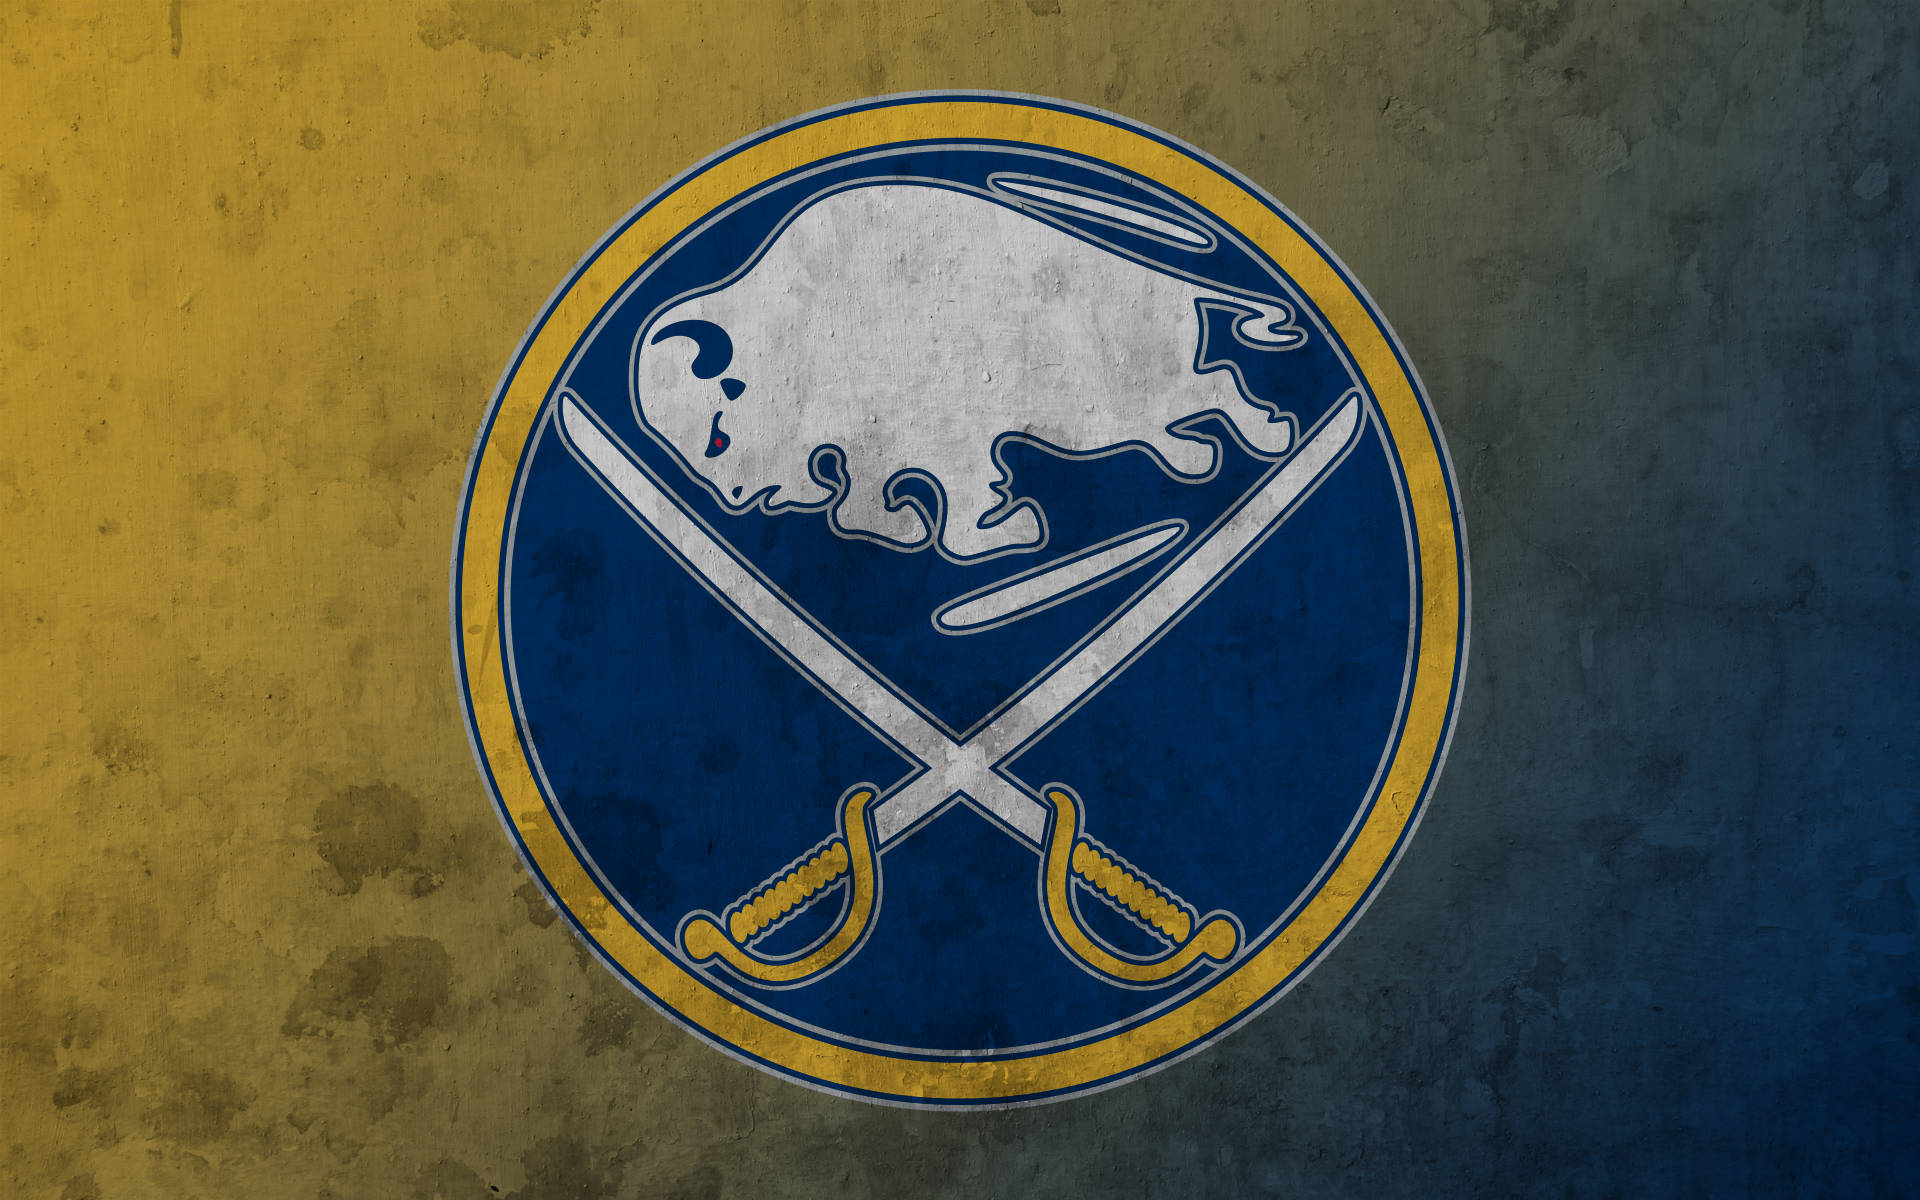 Buffalo Sabres Displaying Strength And Spirit In Rugged Blue And Yellow